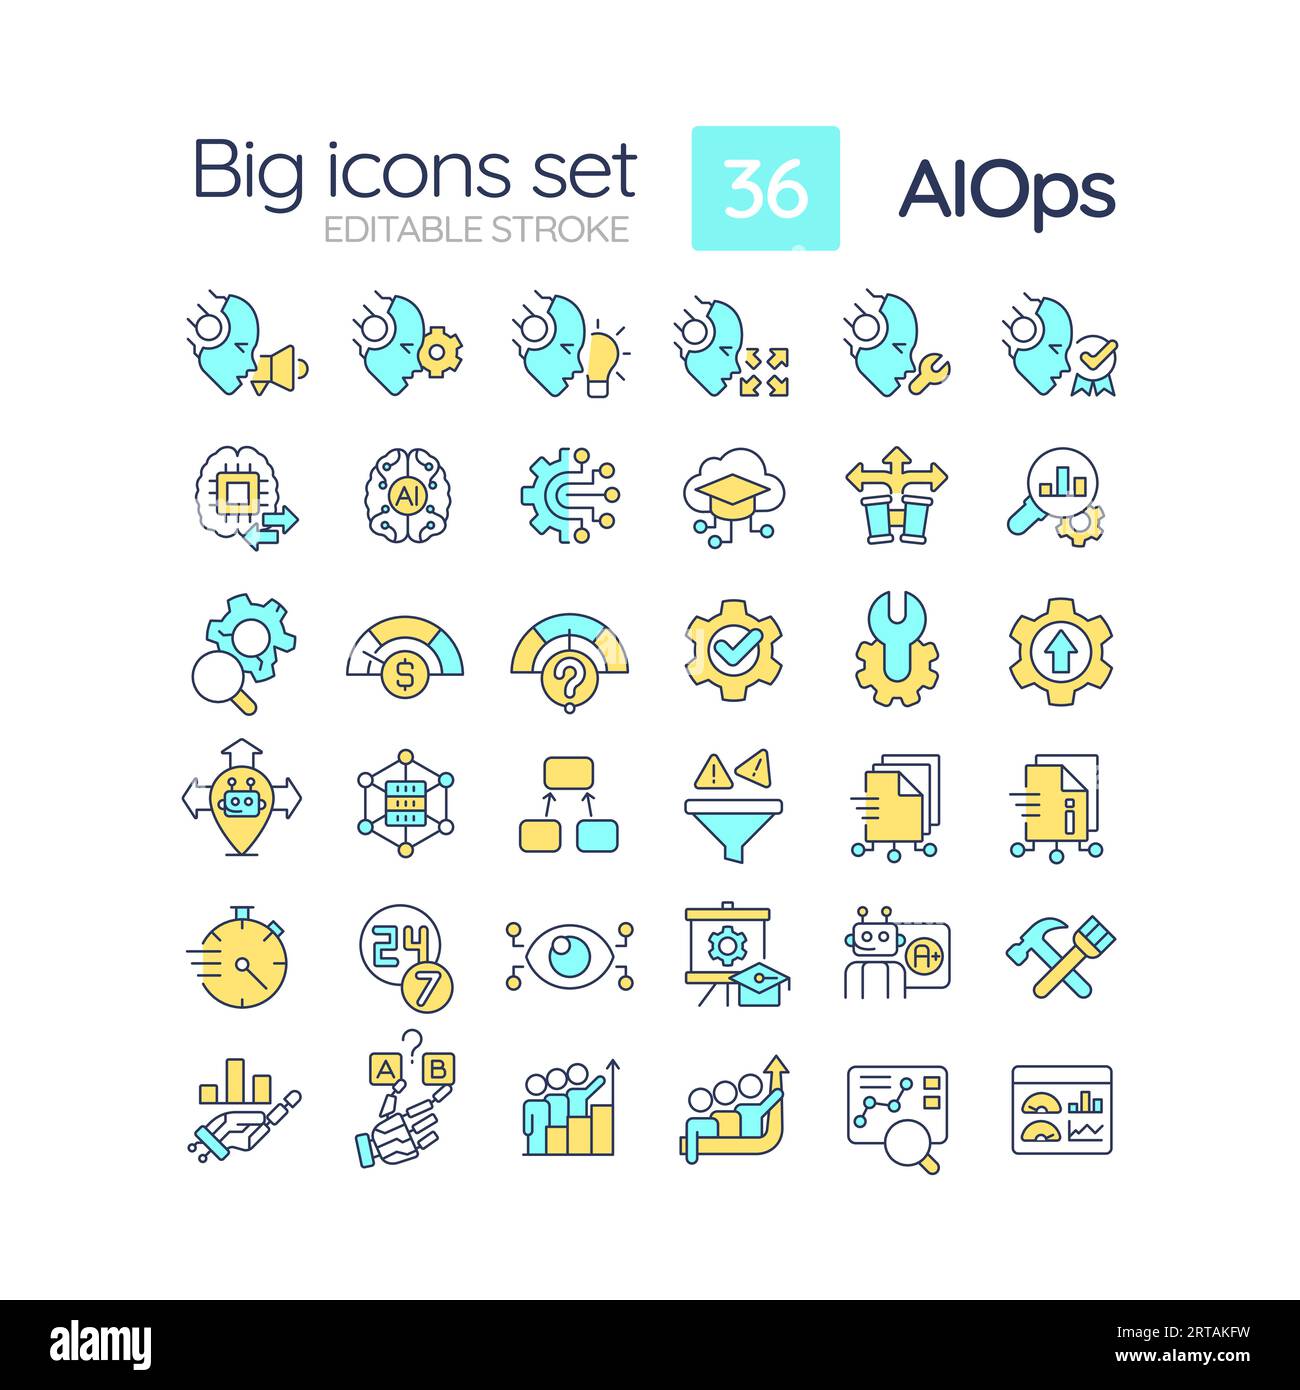 Editable multicolor big icons set for AI ops Stock Vector